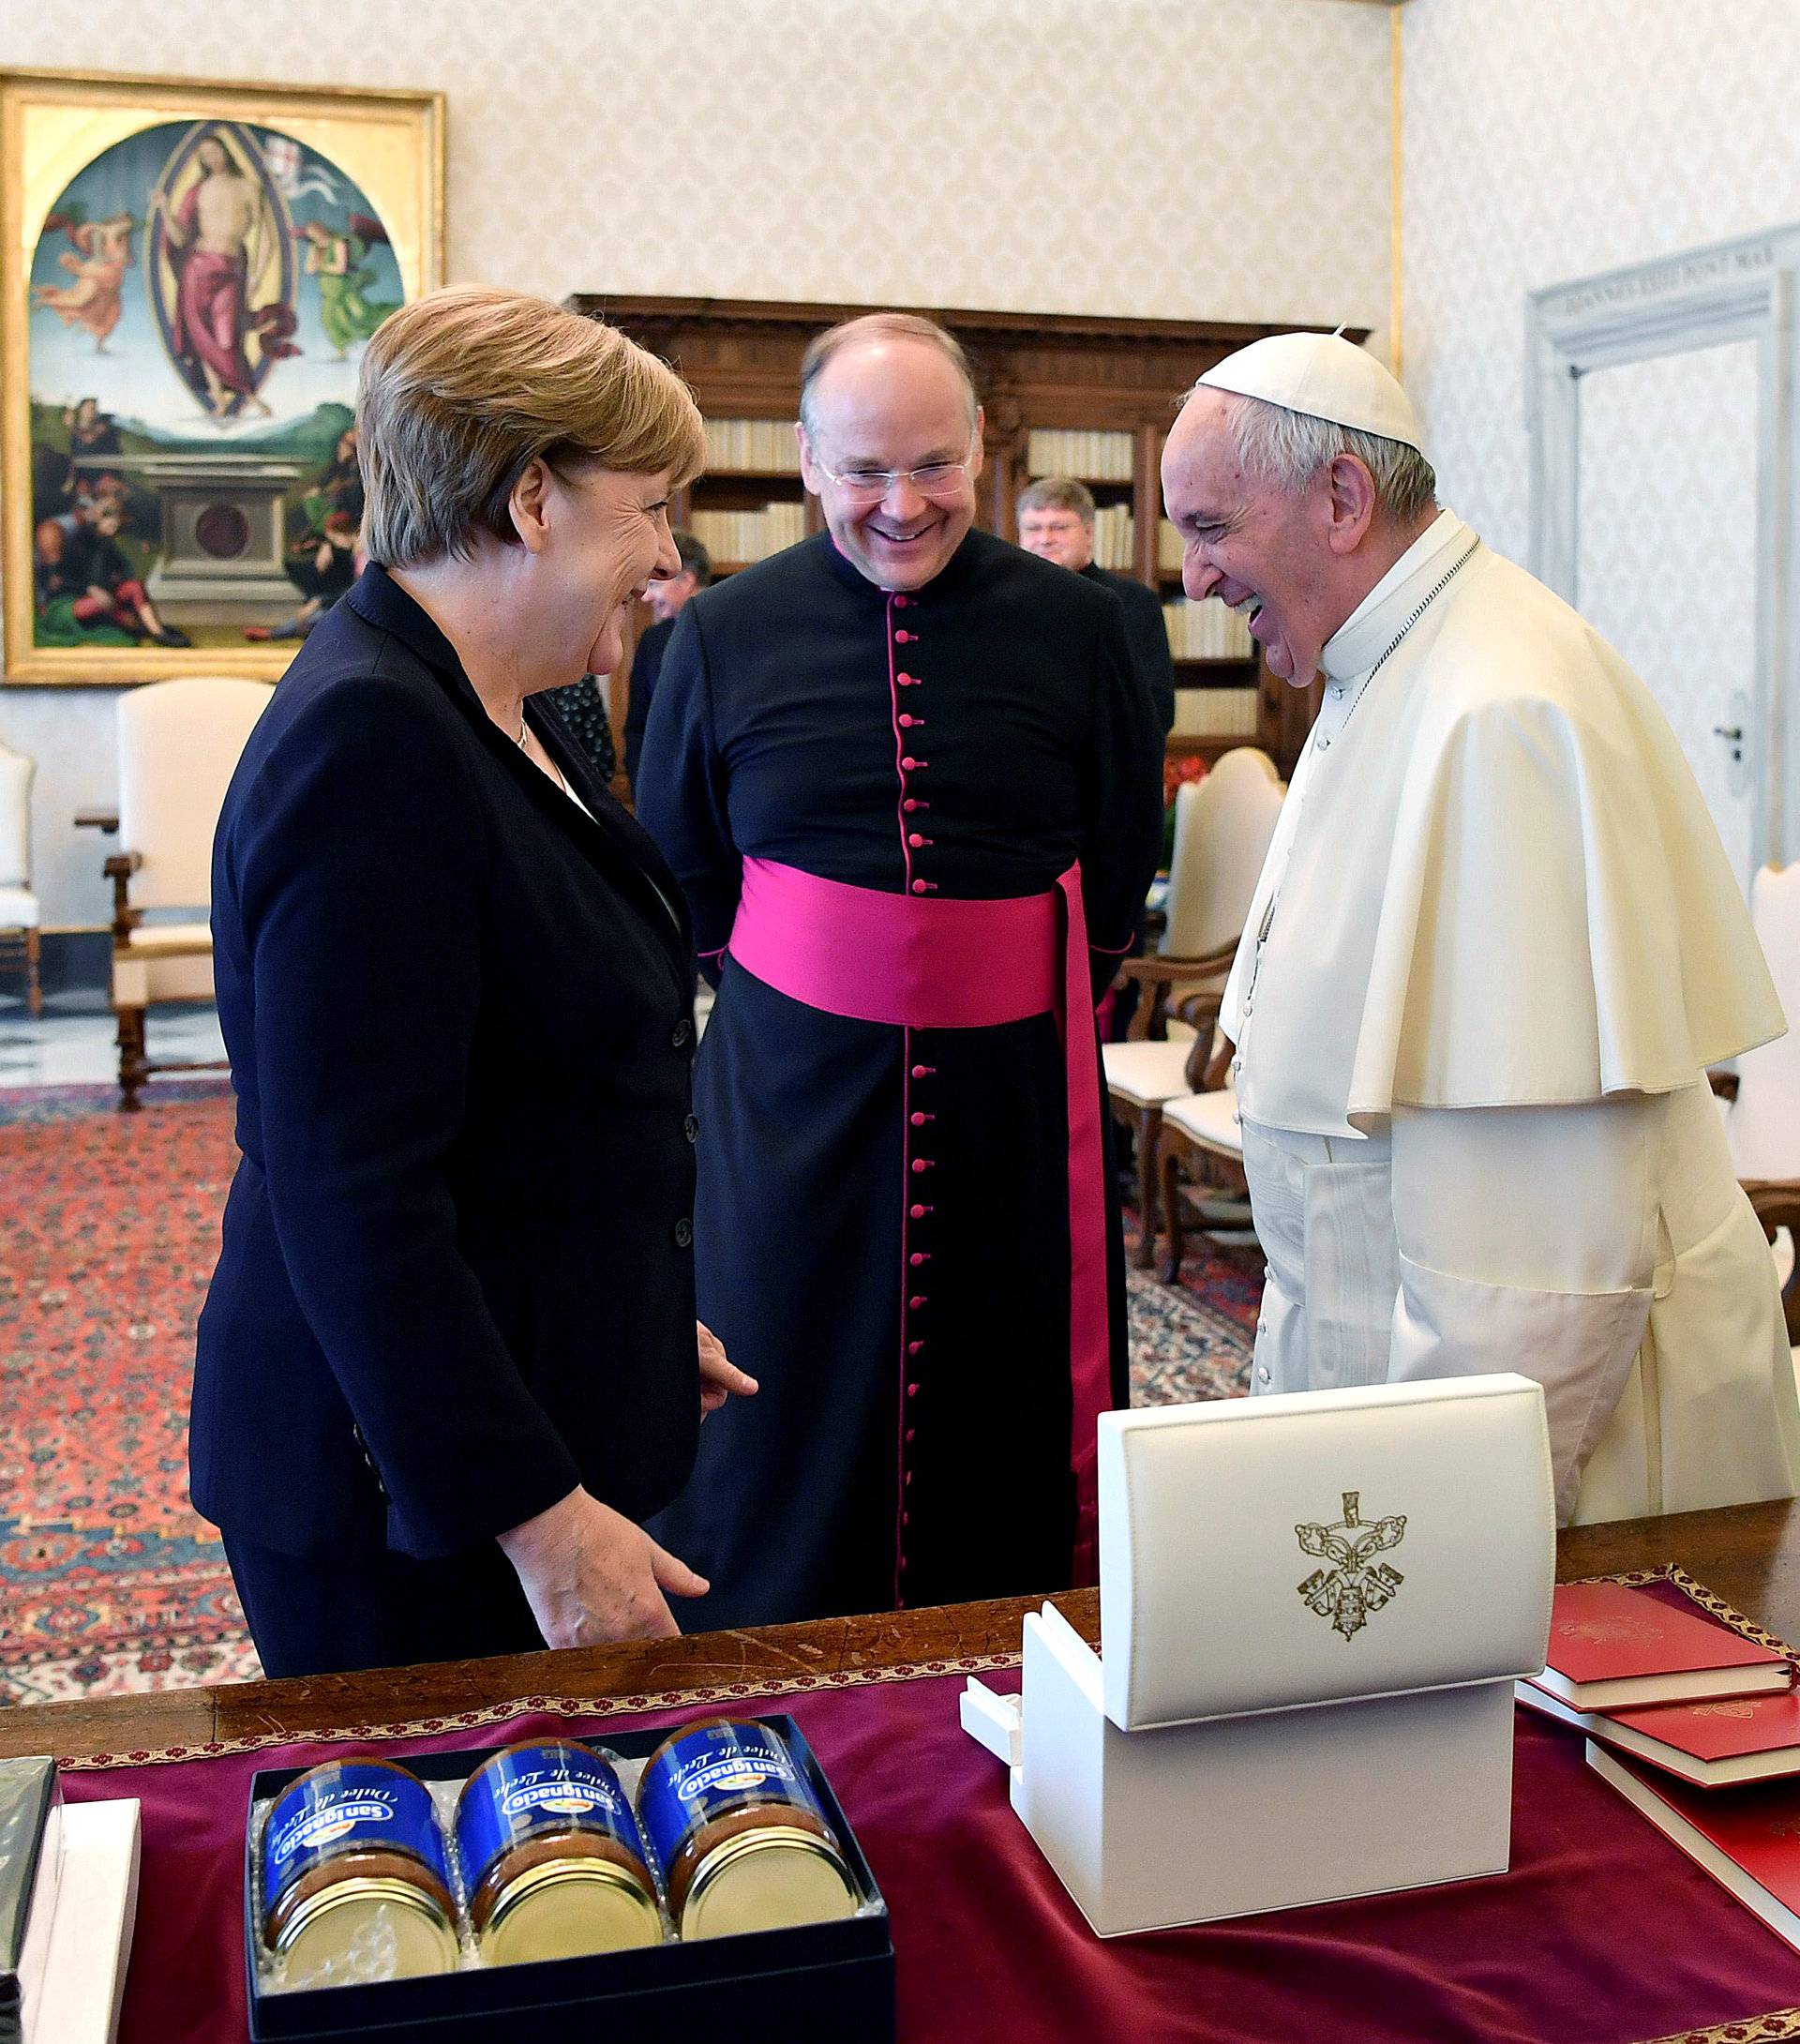 German Chancellor Merkel exchanges gifts with Pope Francis during a meeting at the Vatican